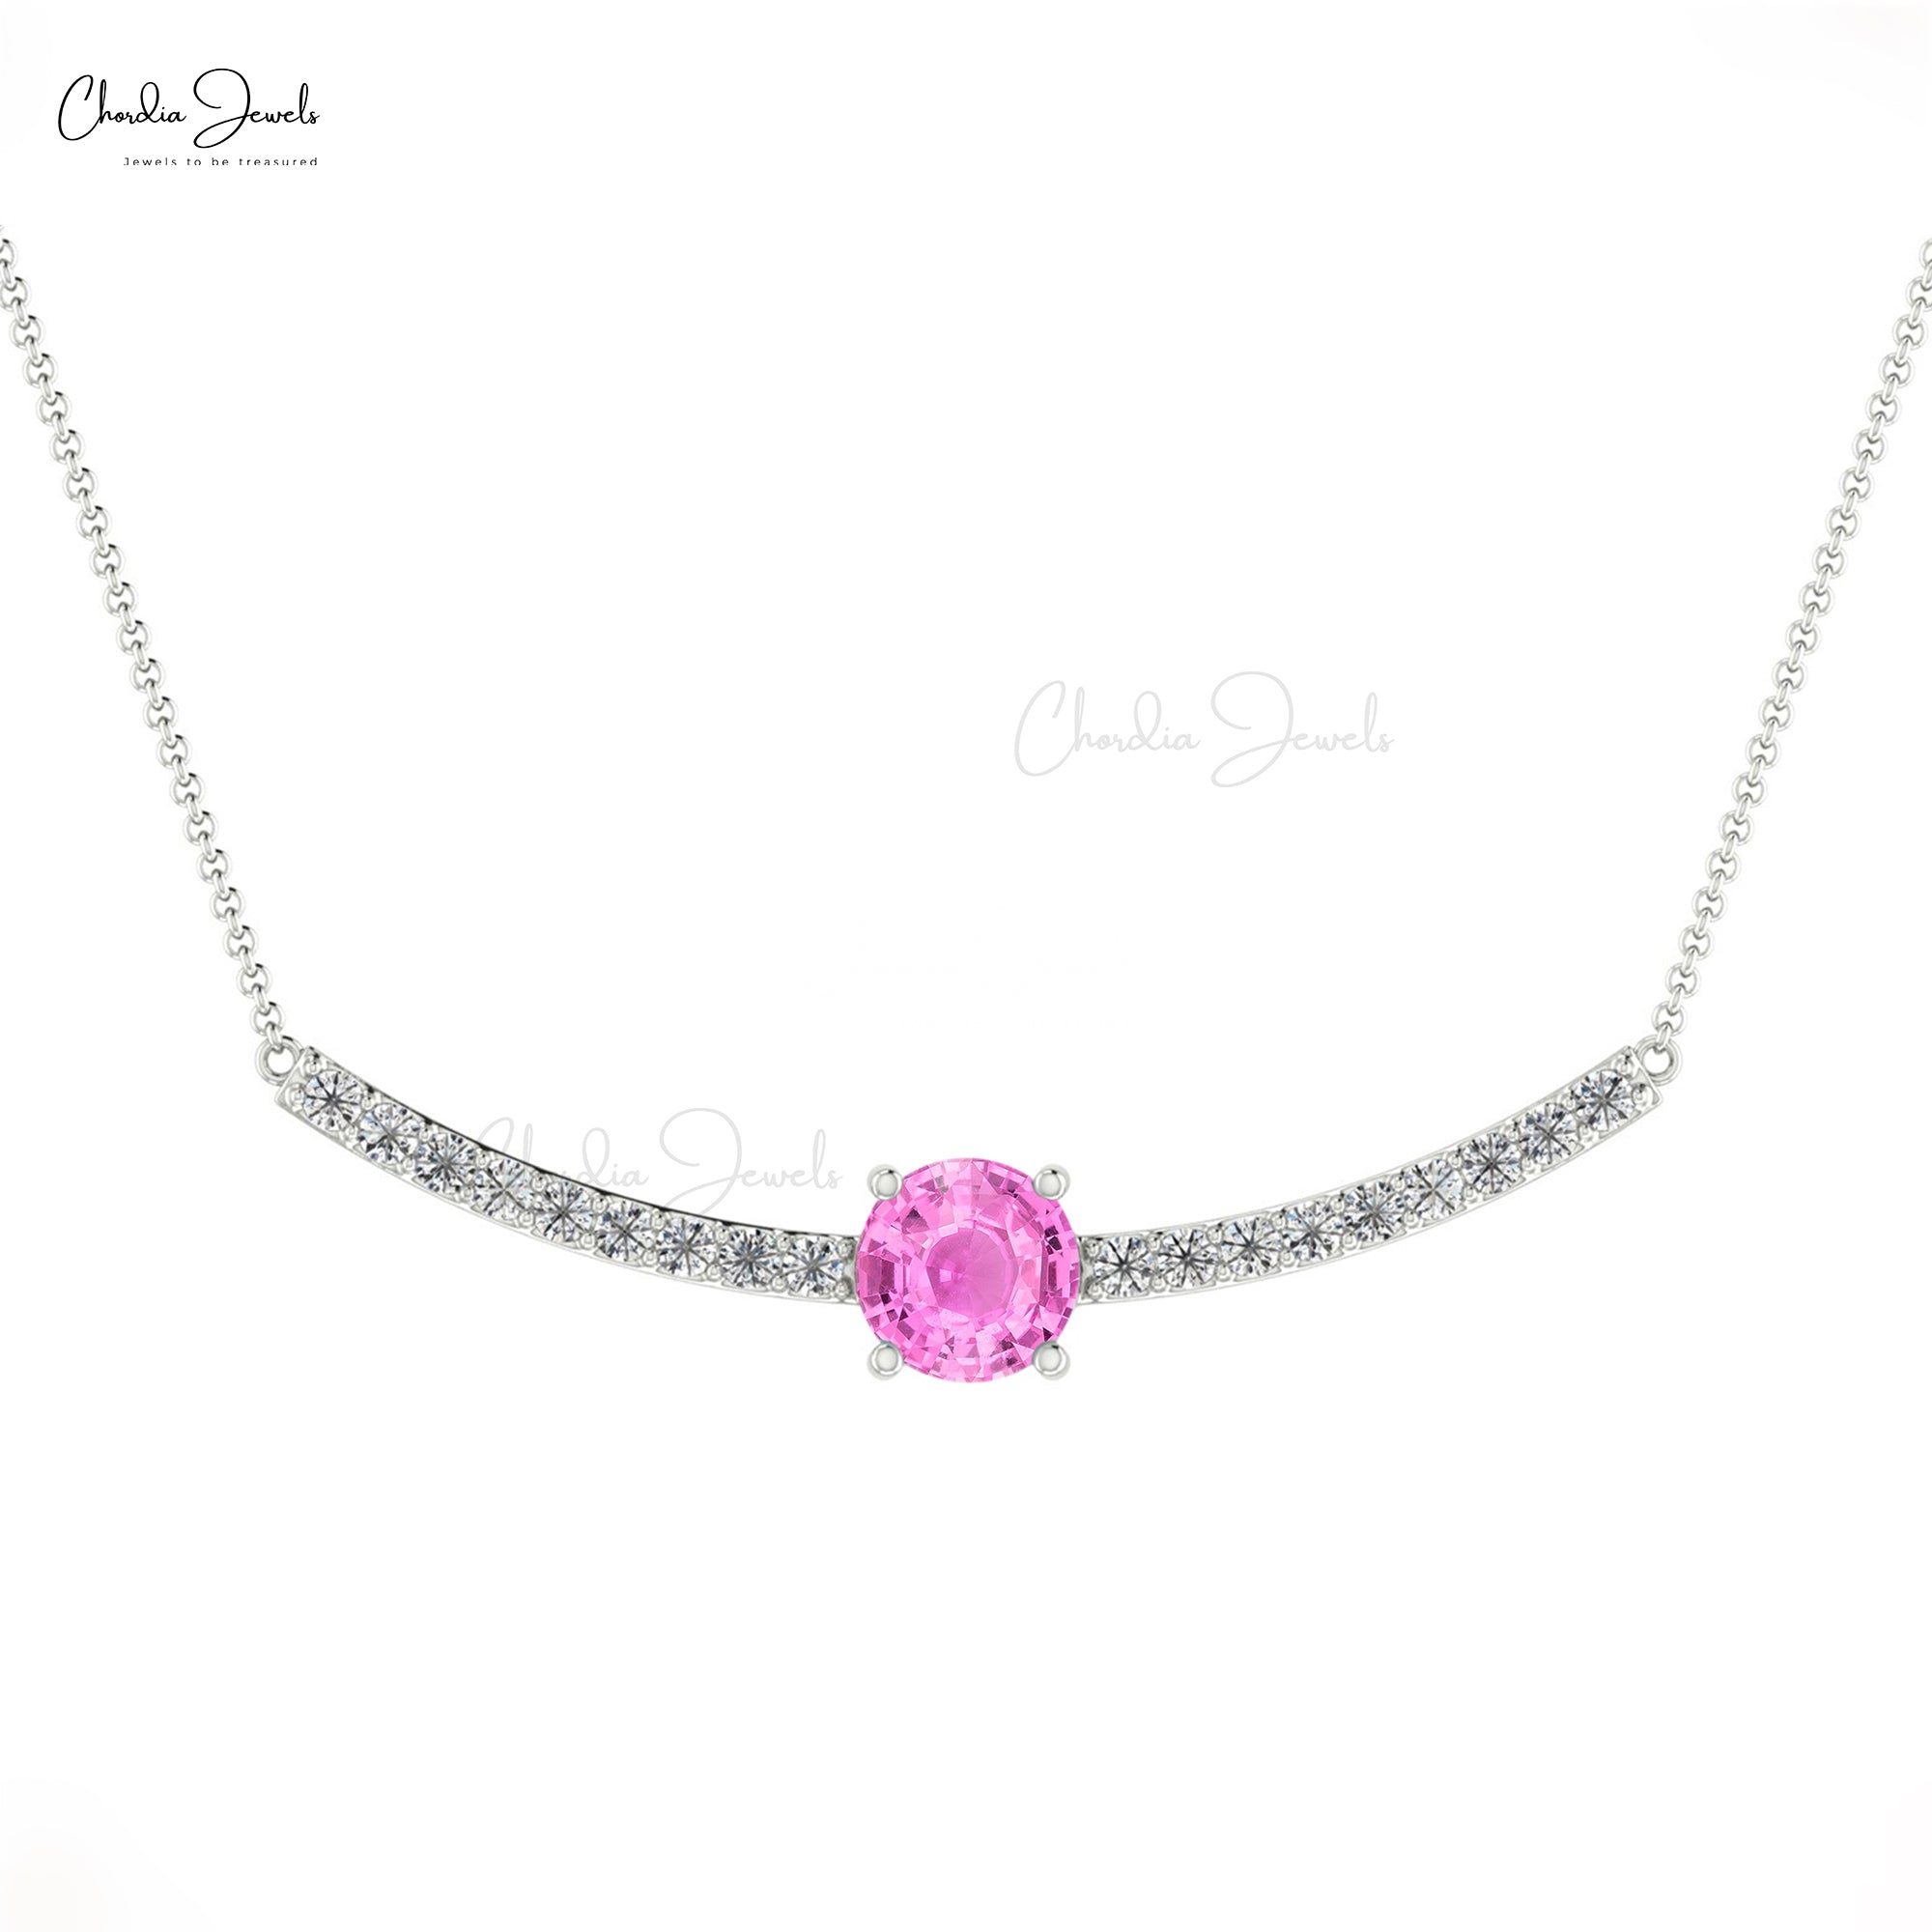 Buy Pink Sapphire Dainty Necklace in 14k Real Gold | Chordia Jewels